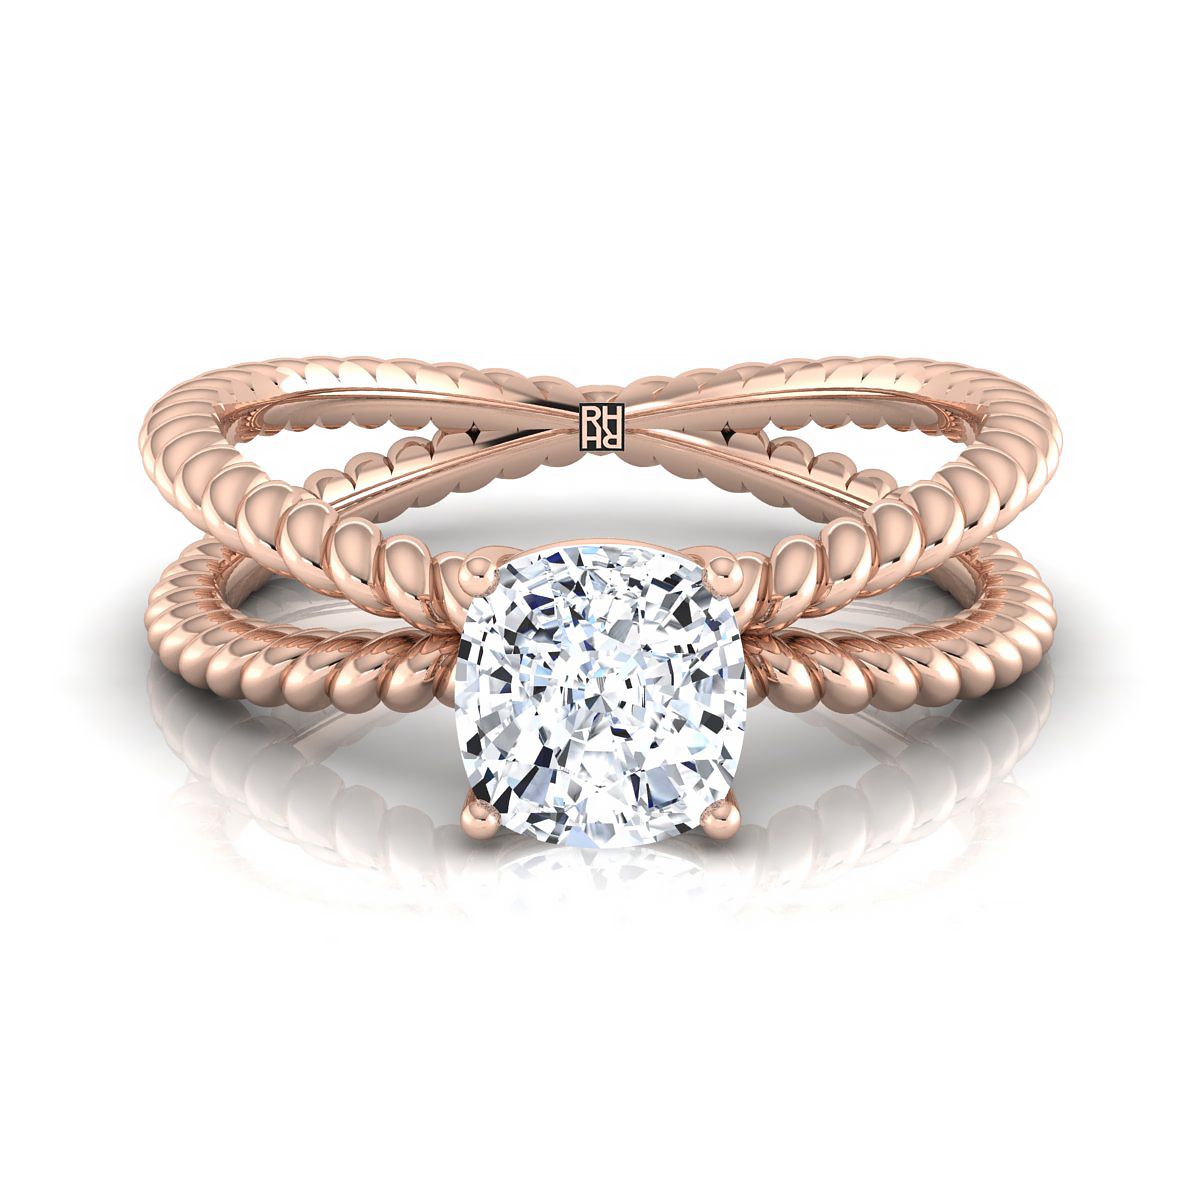 14K Rose Gold Cushion Criss Cross Twisted Rope Solitaire Engagement Ring